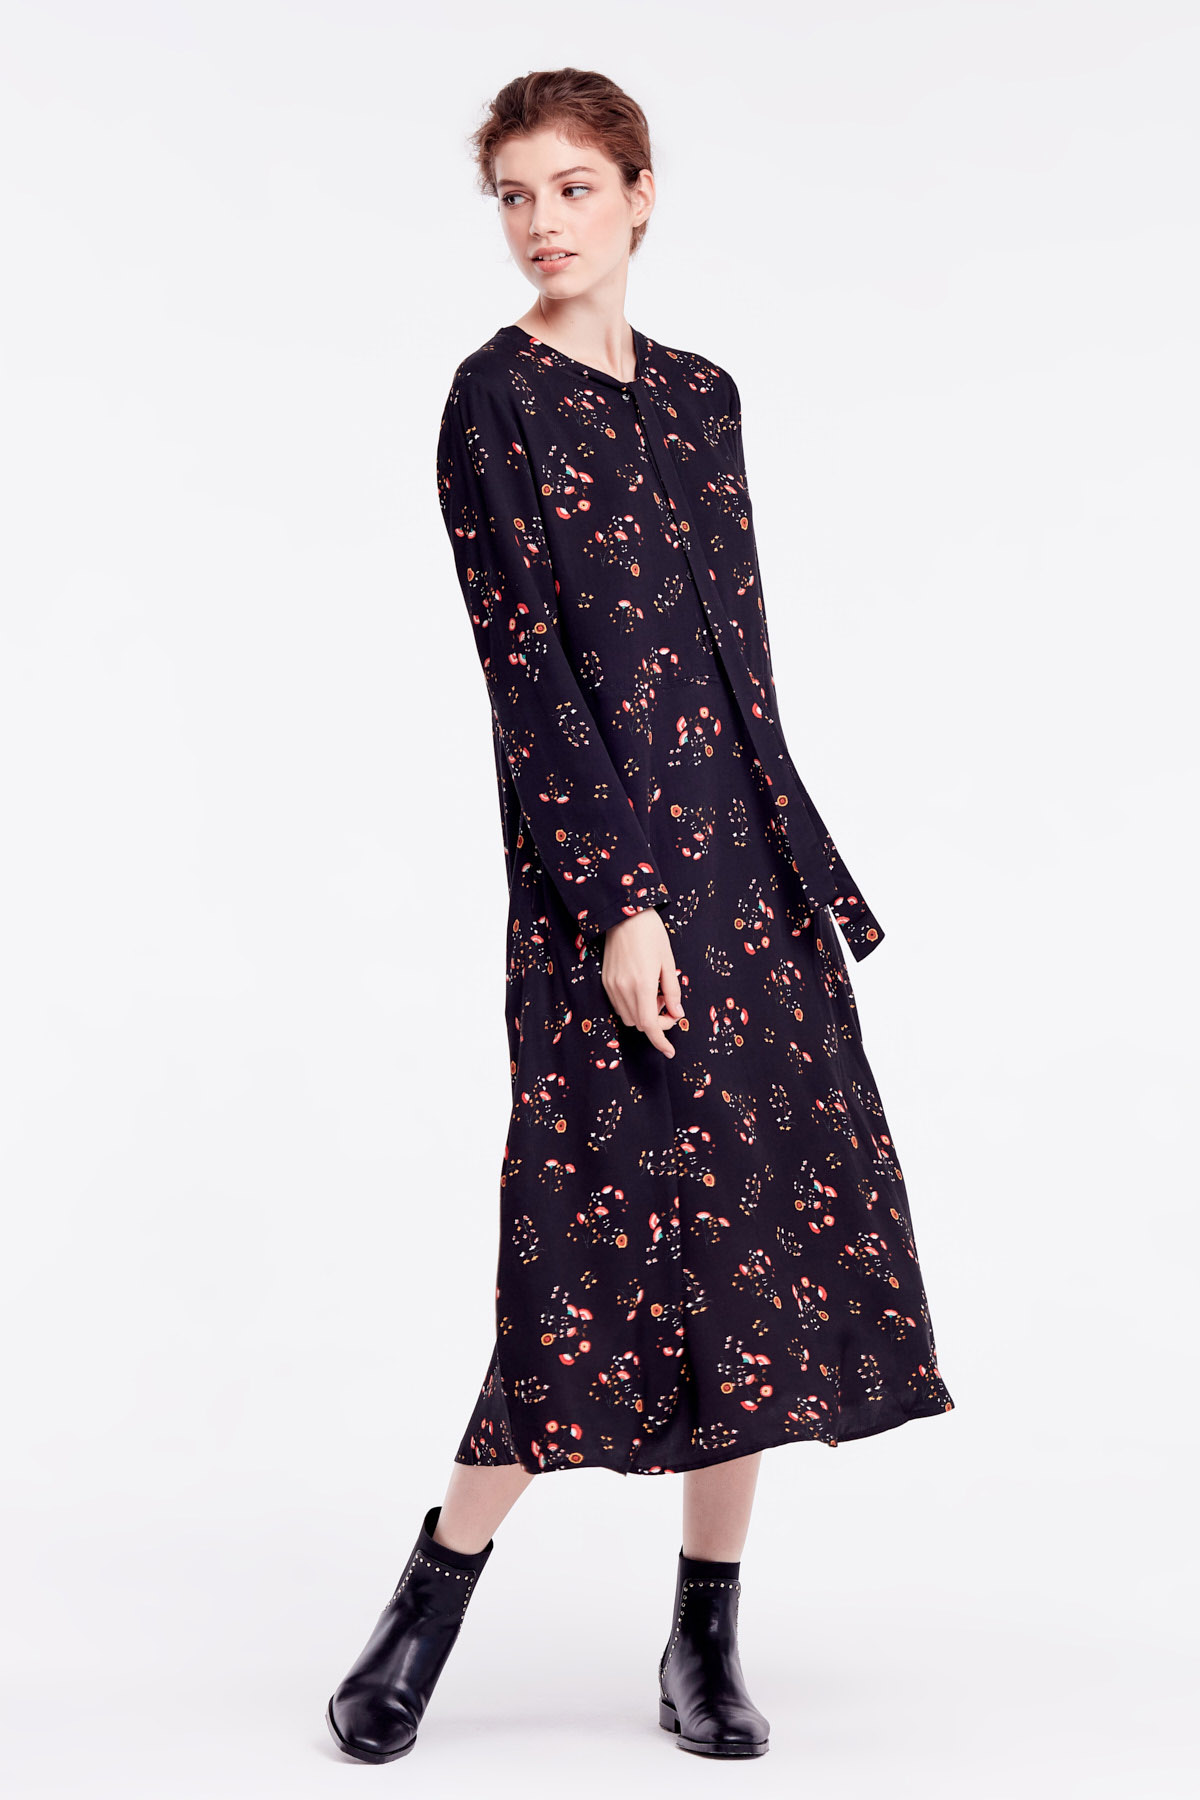 Midi black floral dress with a bow , photo 8